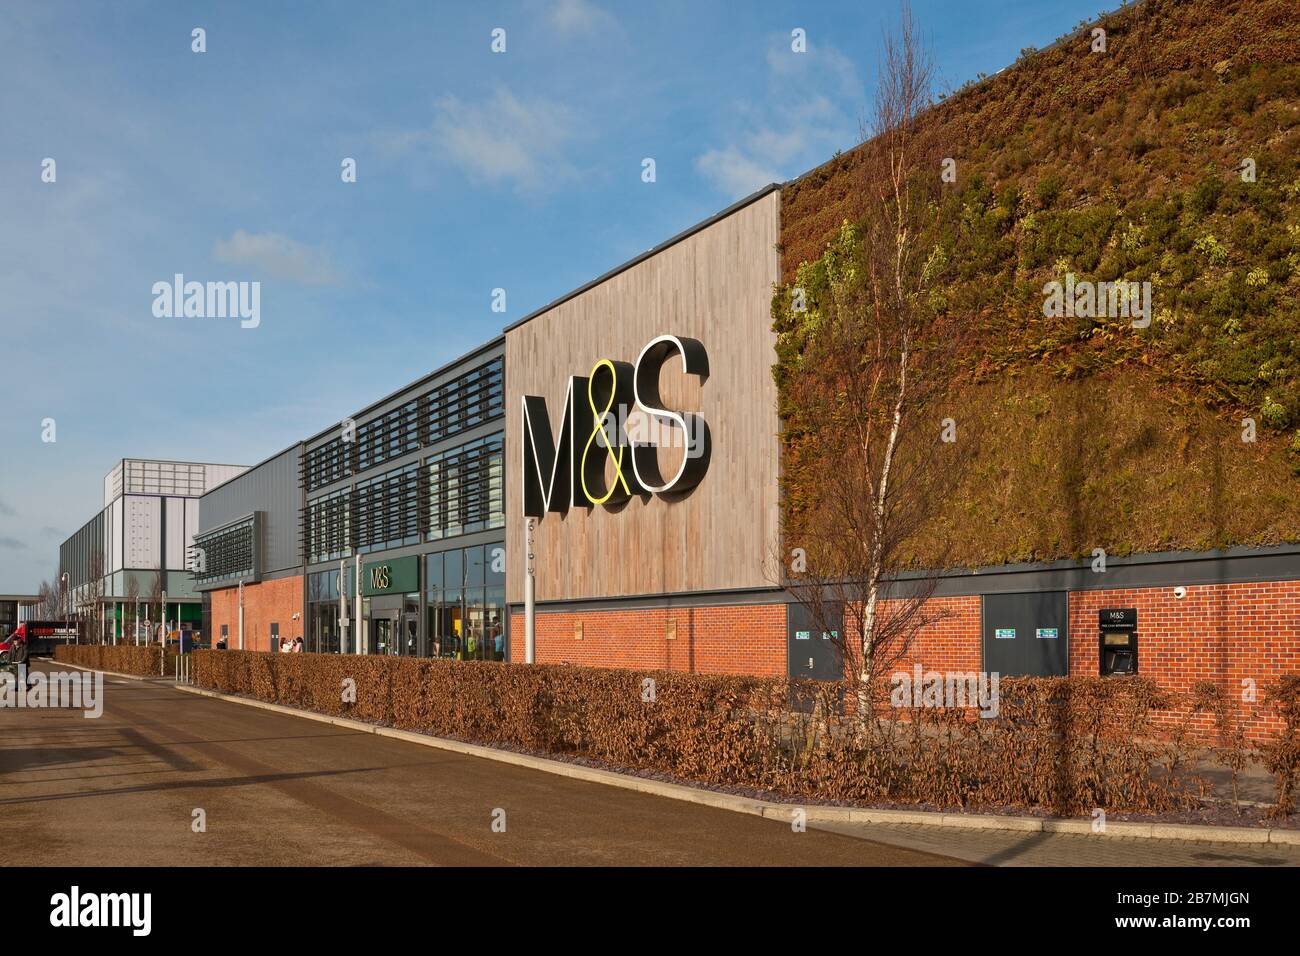 M&S Shop Stores and Vertical Garden with Plant and Greenery Living Wall at the Vanguard Retail Park Shopping Centre York North Yorkshire England UK Stock Photo